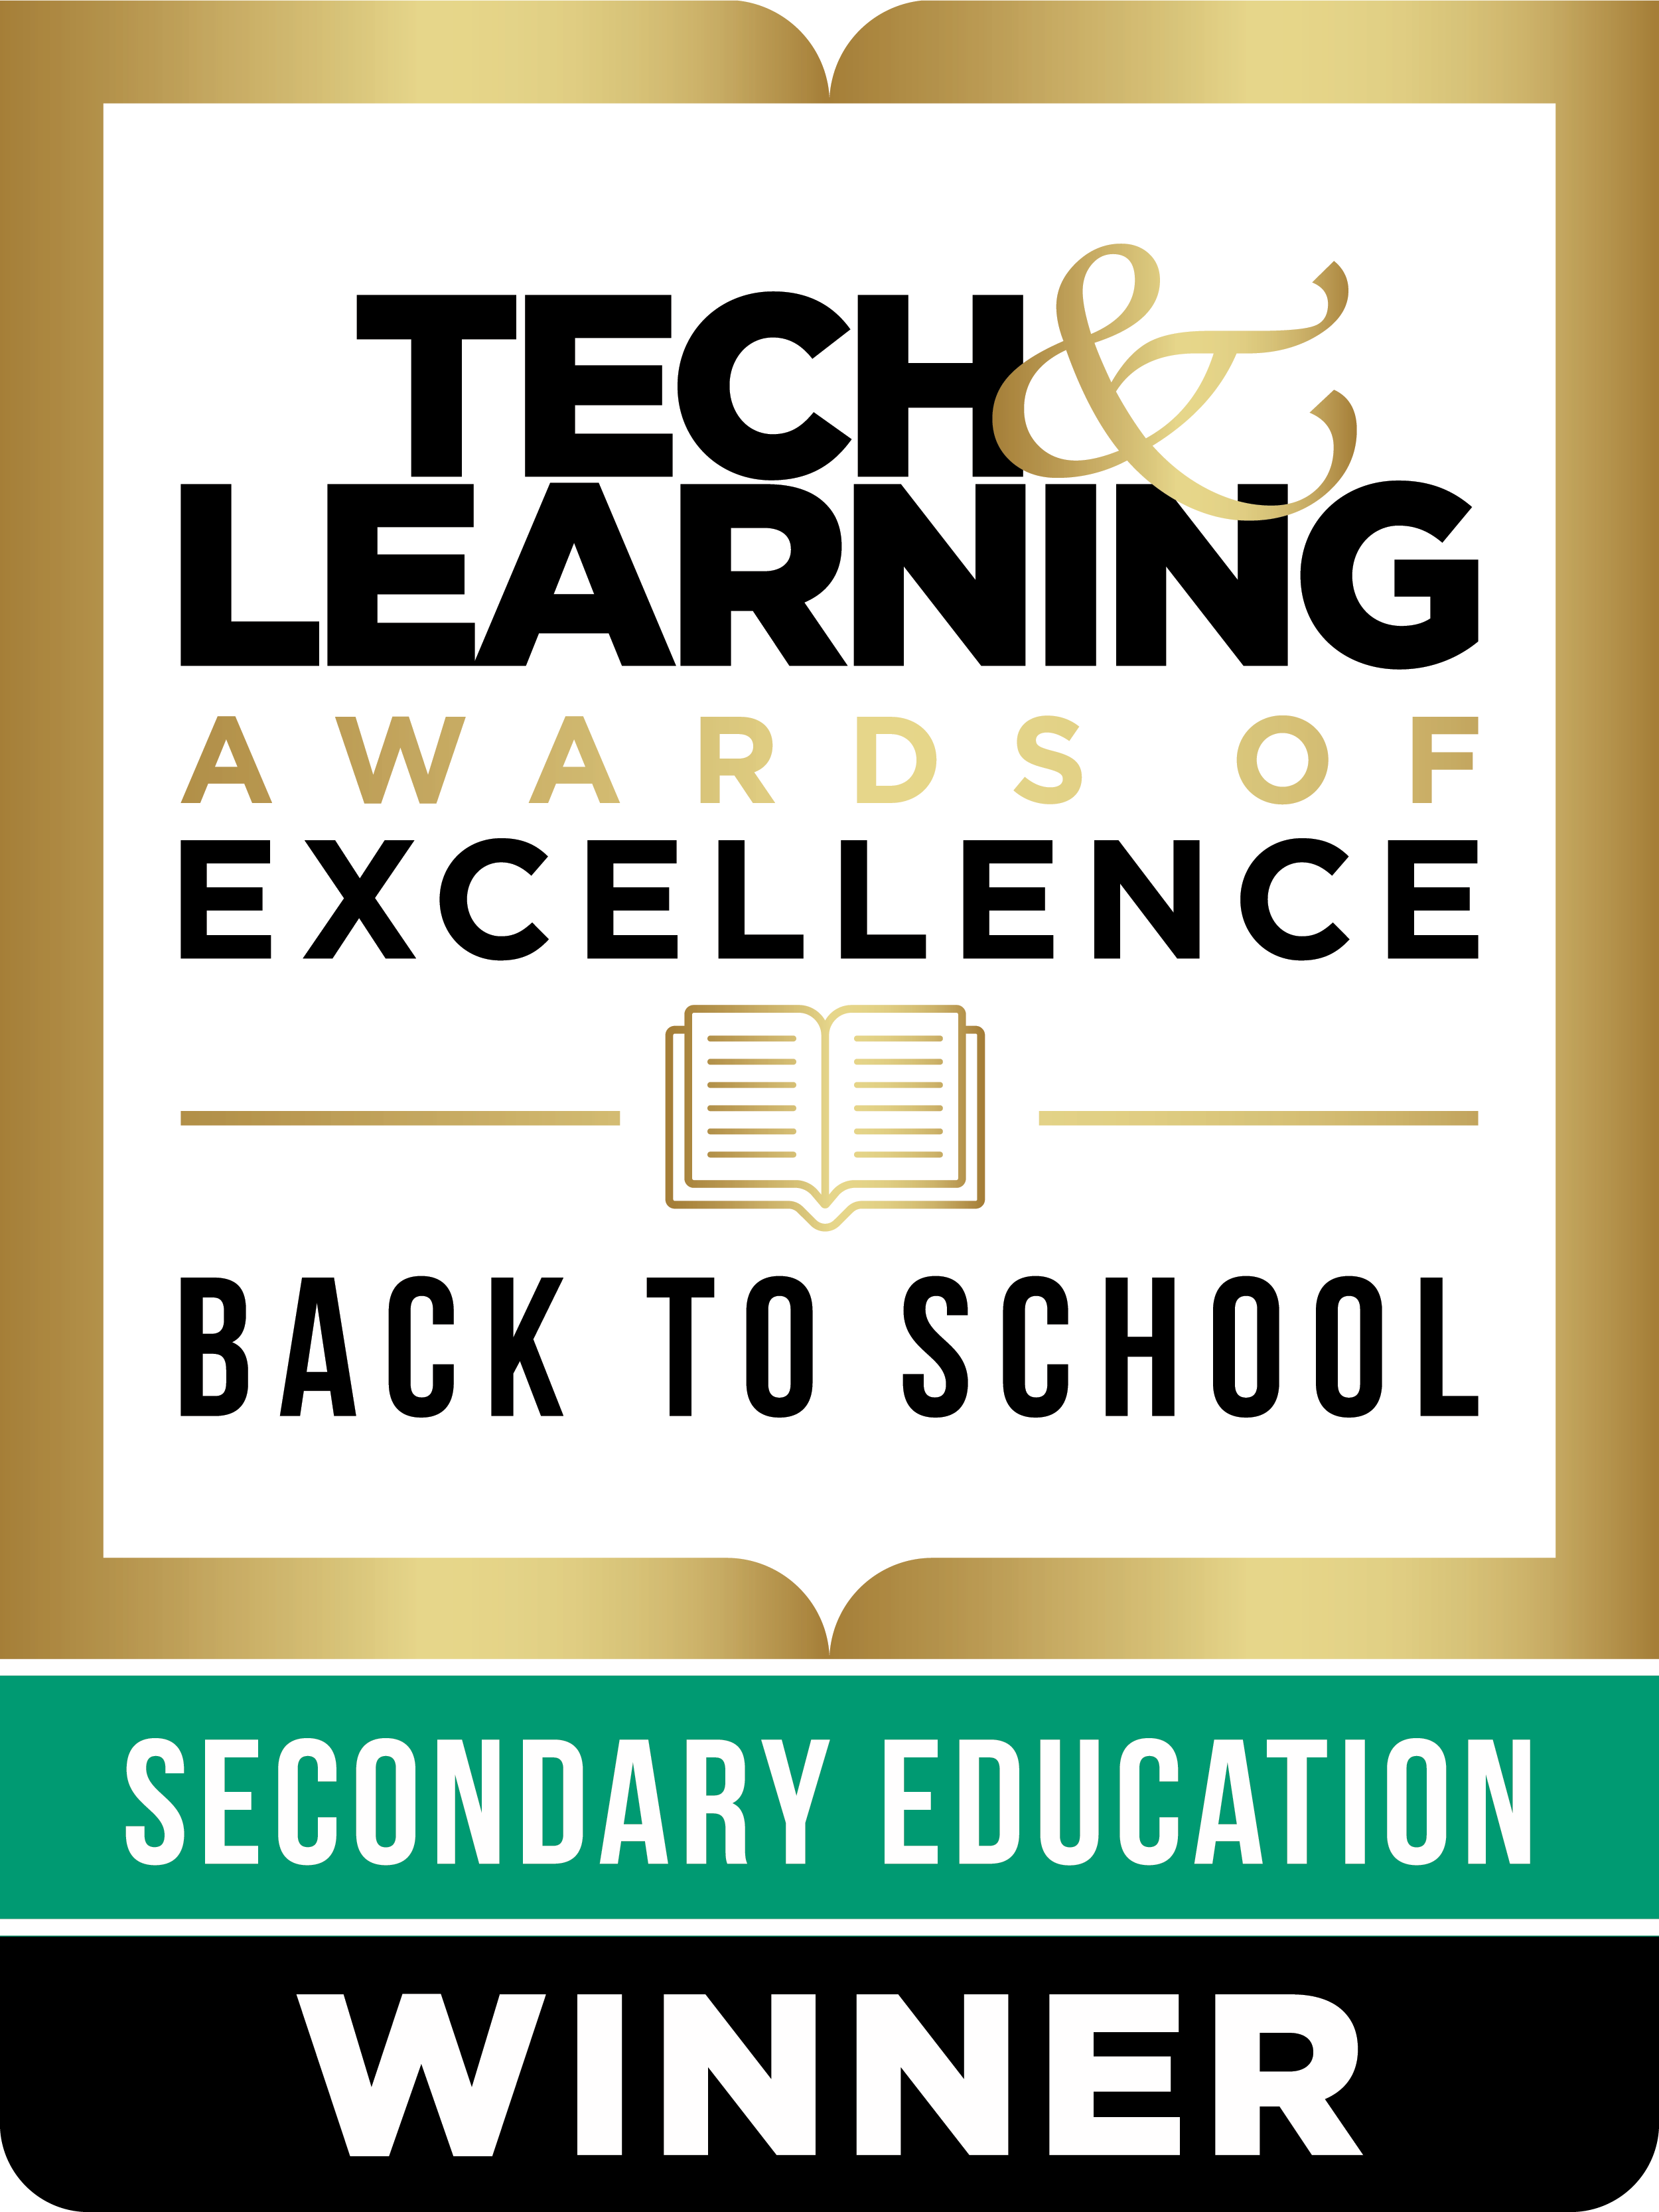 Tech & Learning Awards of Excellence Back to School - Secondary Education